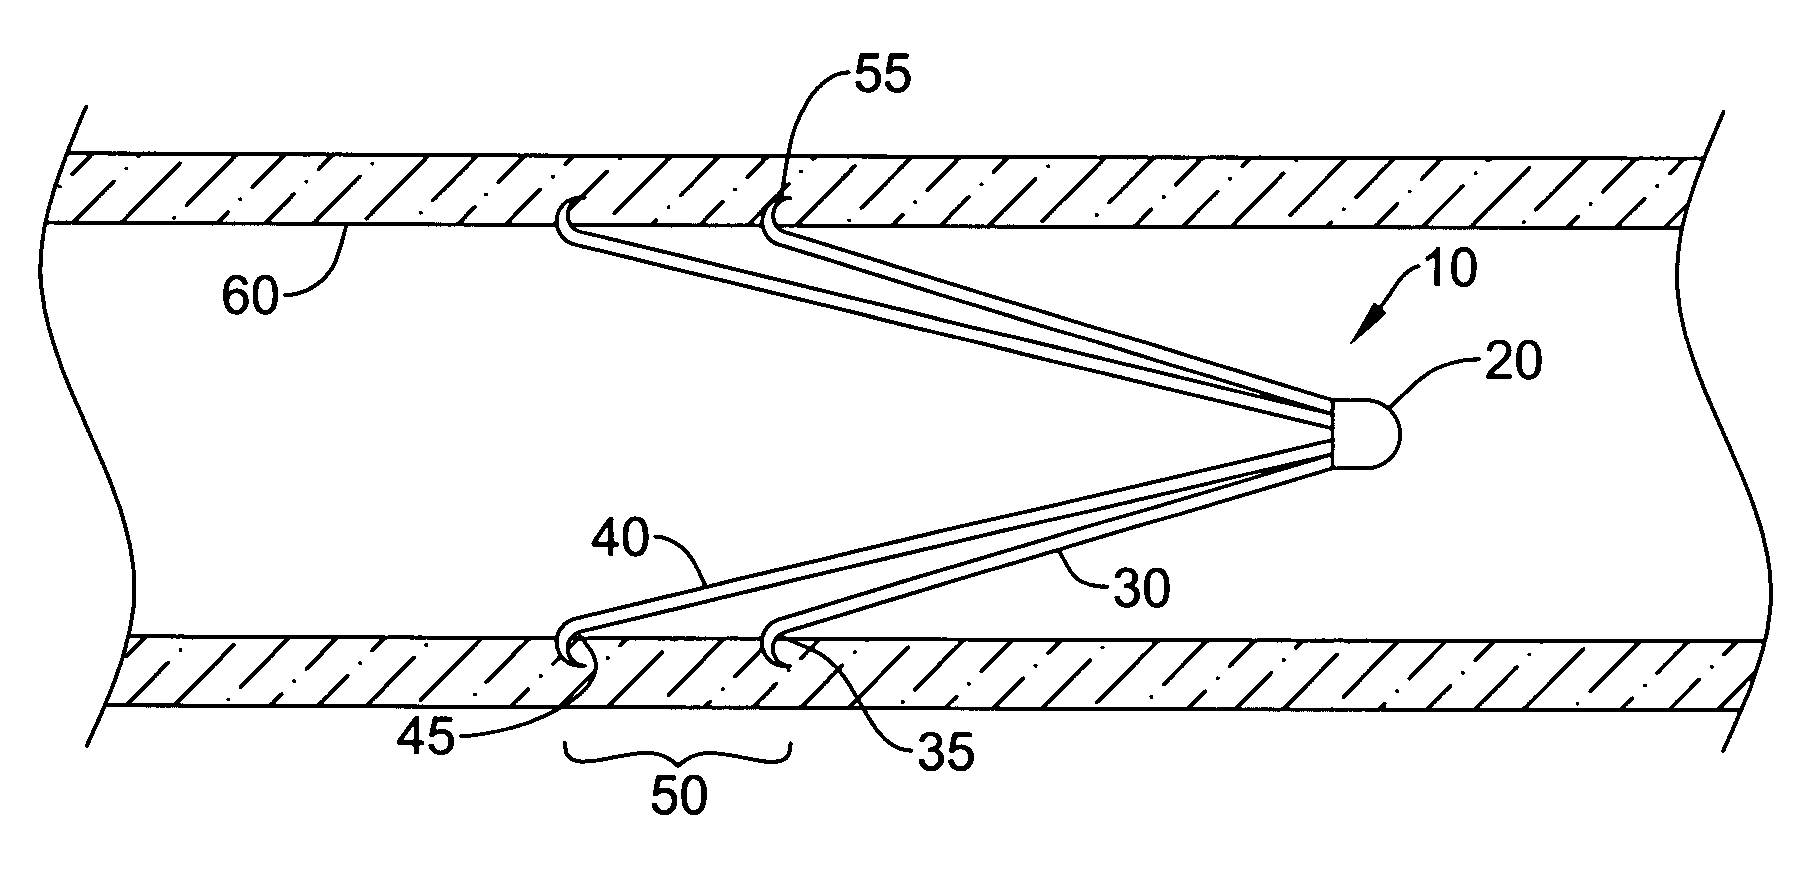 Filter with positioning and retrieval devices and methods